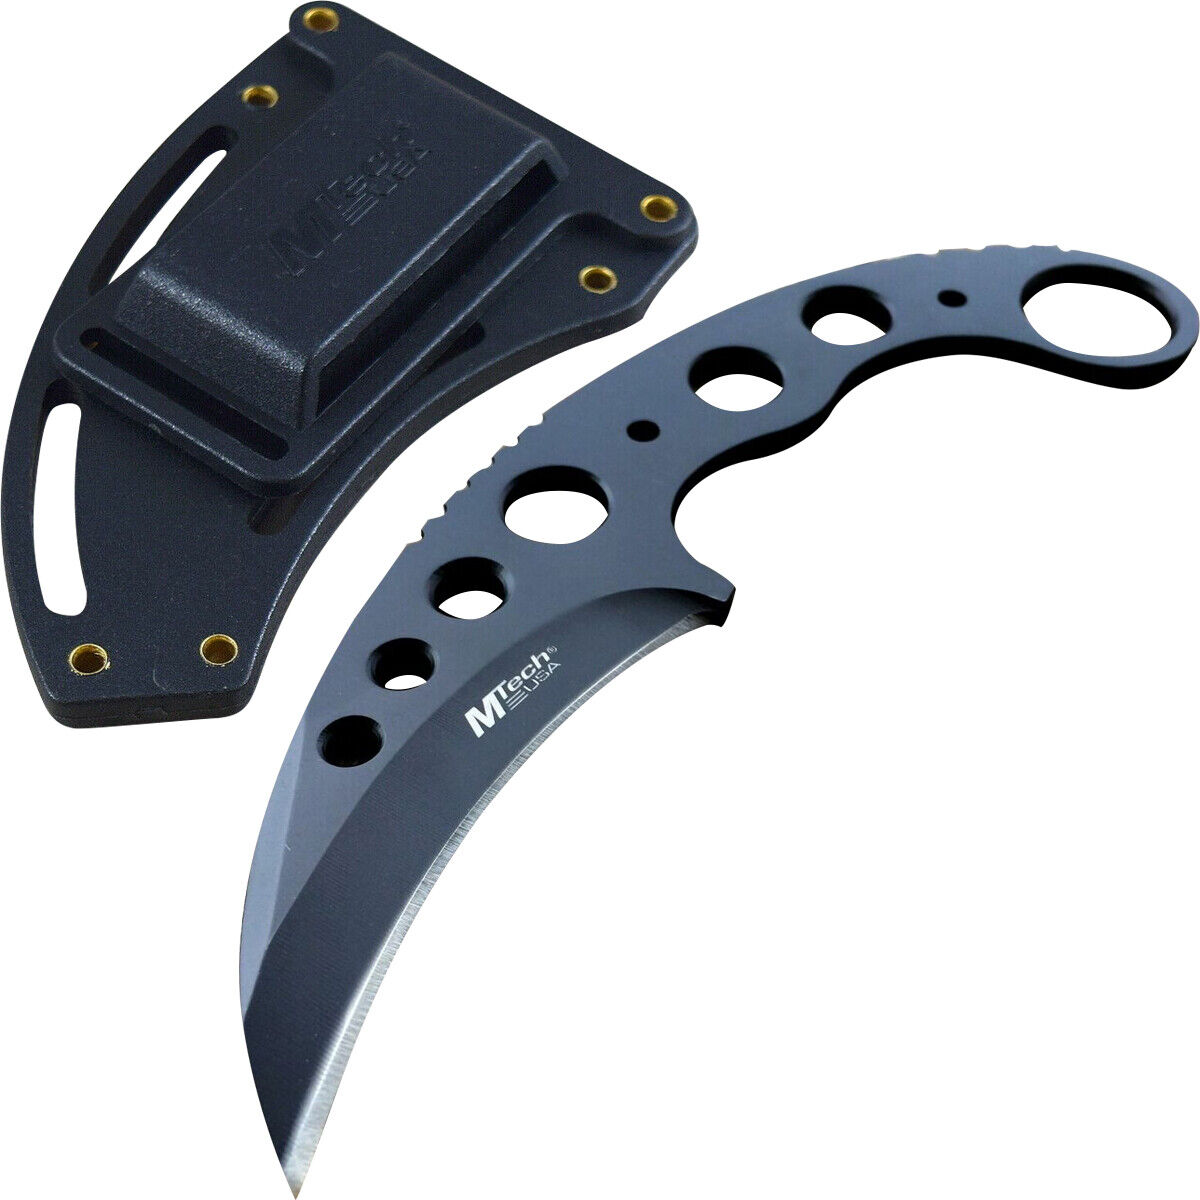  This tactical neck knife provides instant defense right around your neck! The karambit style blade is razor sharp with finger cut-outs, and all 420 stainelss steel. The 3 blade is razor sharp, and can be quickly accessed from the quick-release, impact-re